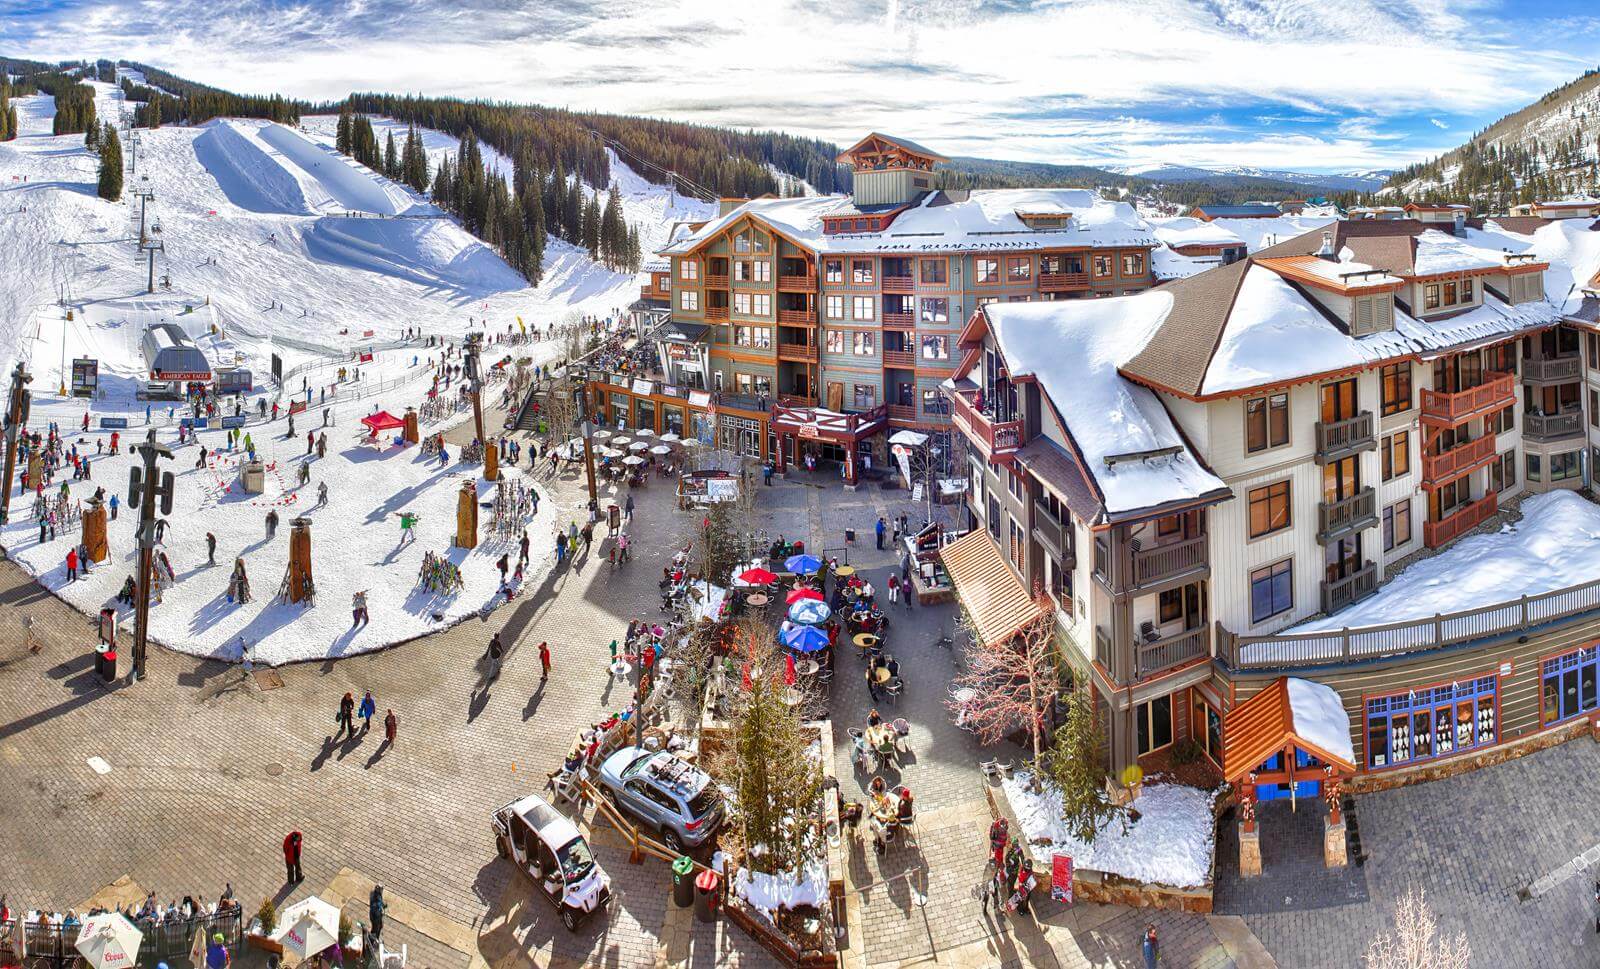 Colorado Ski Resort installs guest engagement tool to help staff as well